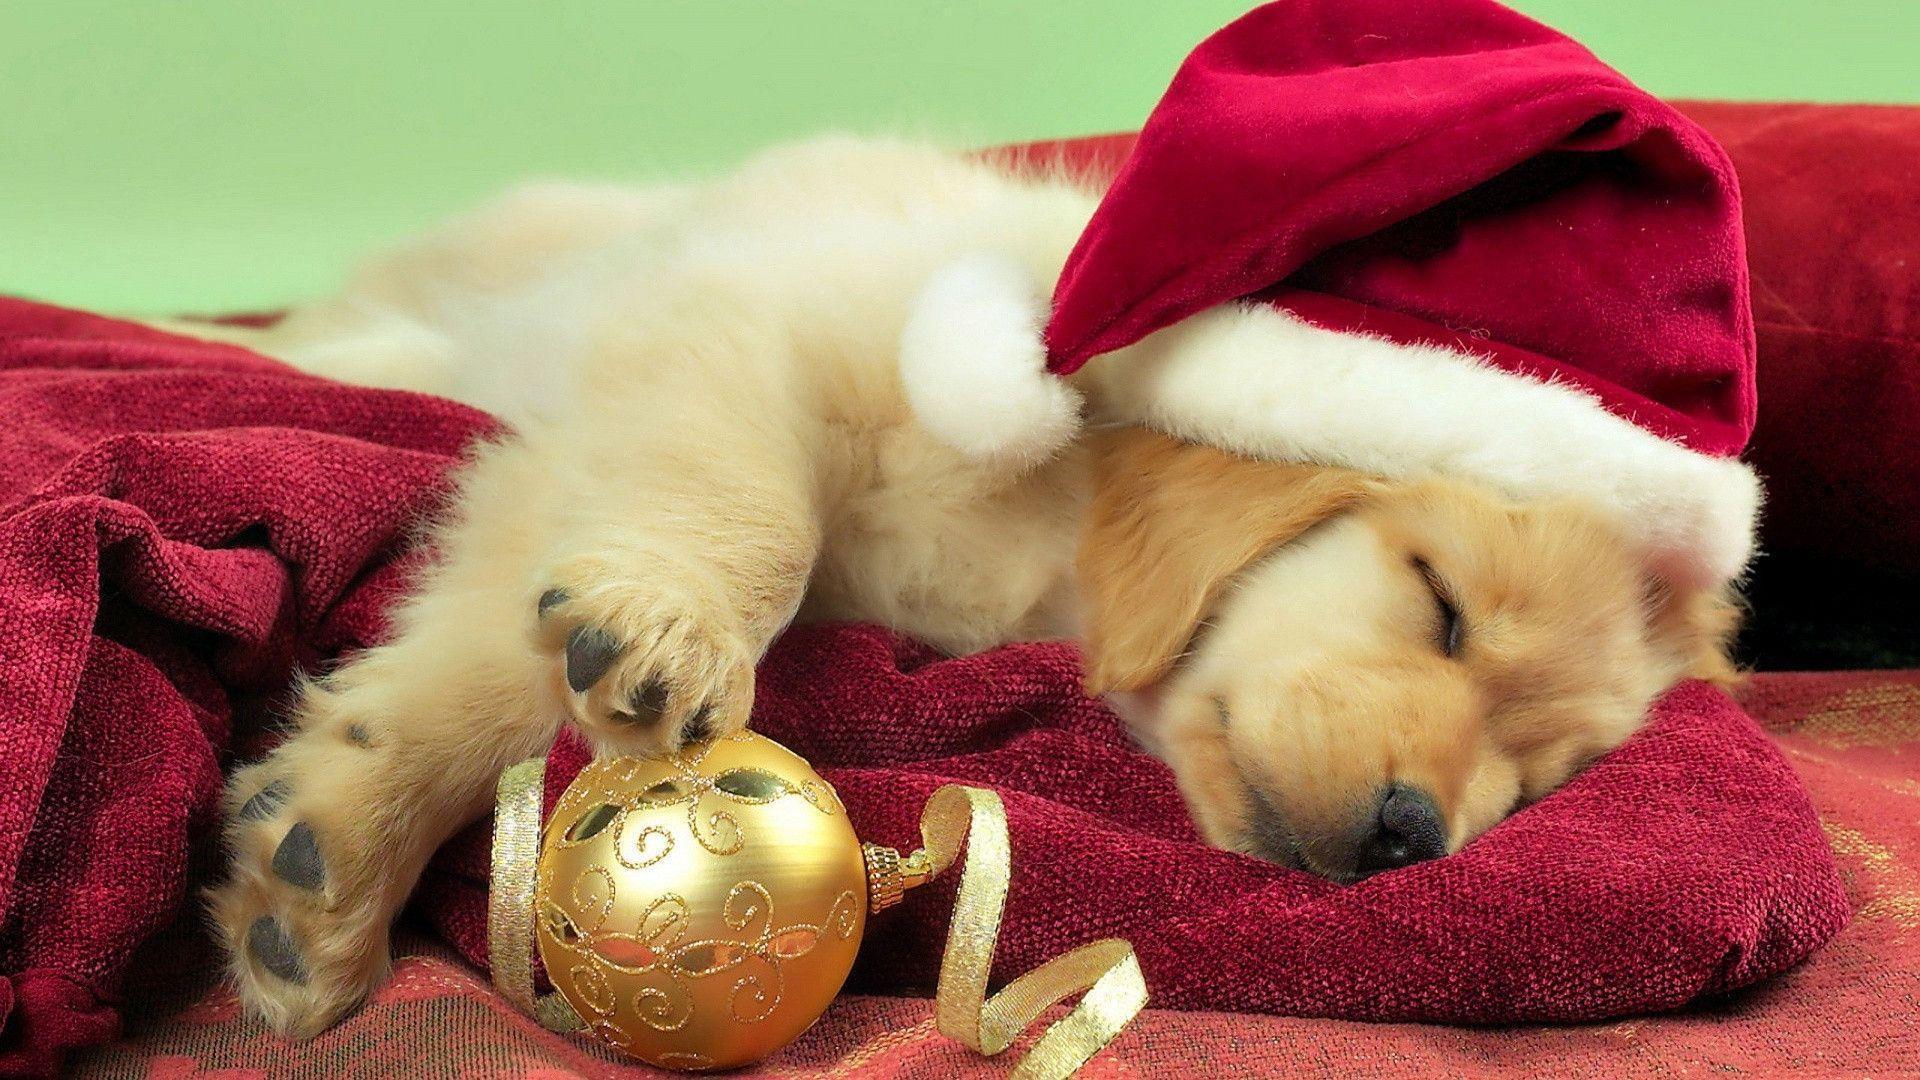 Puppy Christmas Computer Backgrounds